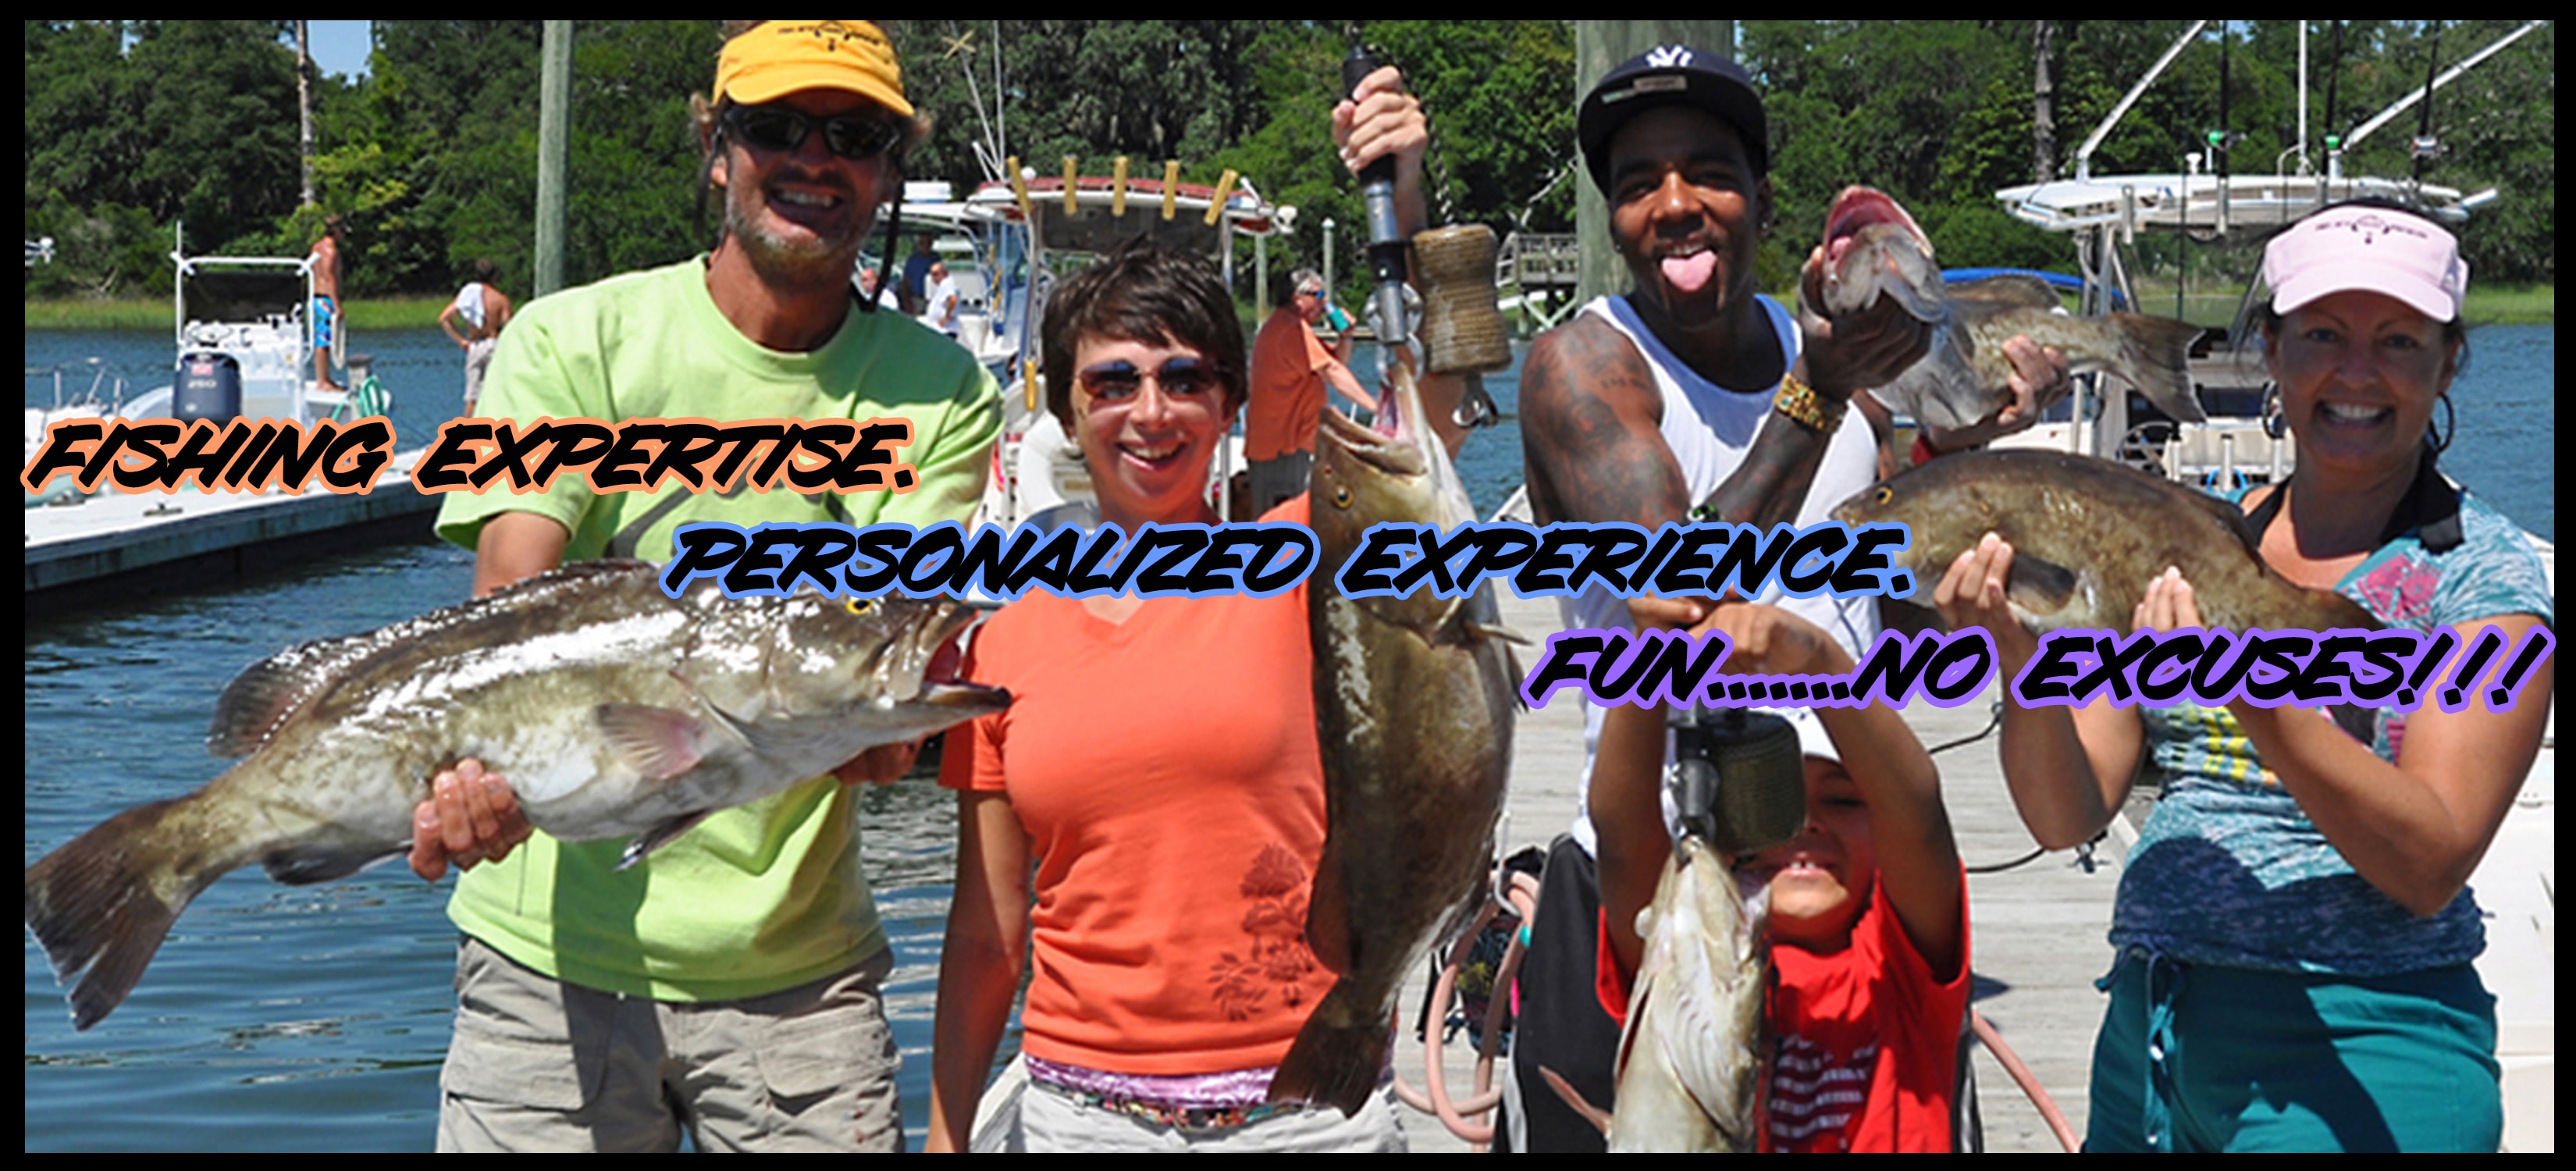 Fishing Charters
NX - surf City Topsail's Top Fishing Charters - #1 All-Inclusive
NX - Wrightsville Beach Top Fishing Charters - #1 All-Inclusive
NX - Carolina Beach Top Fishing Charters - #1 All-Inclusive